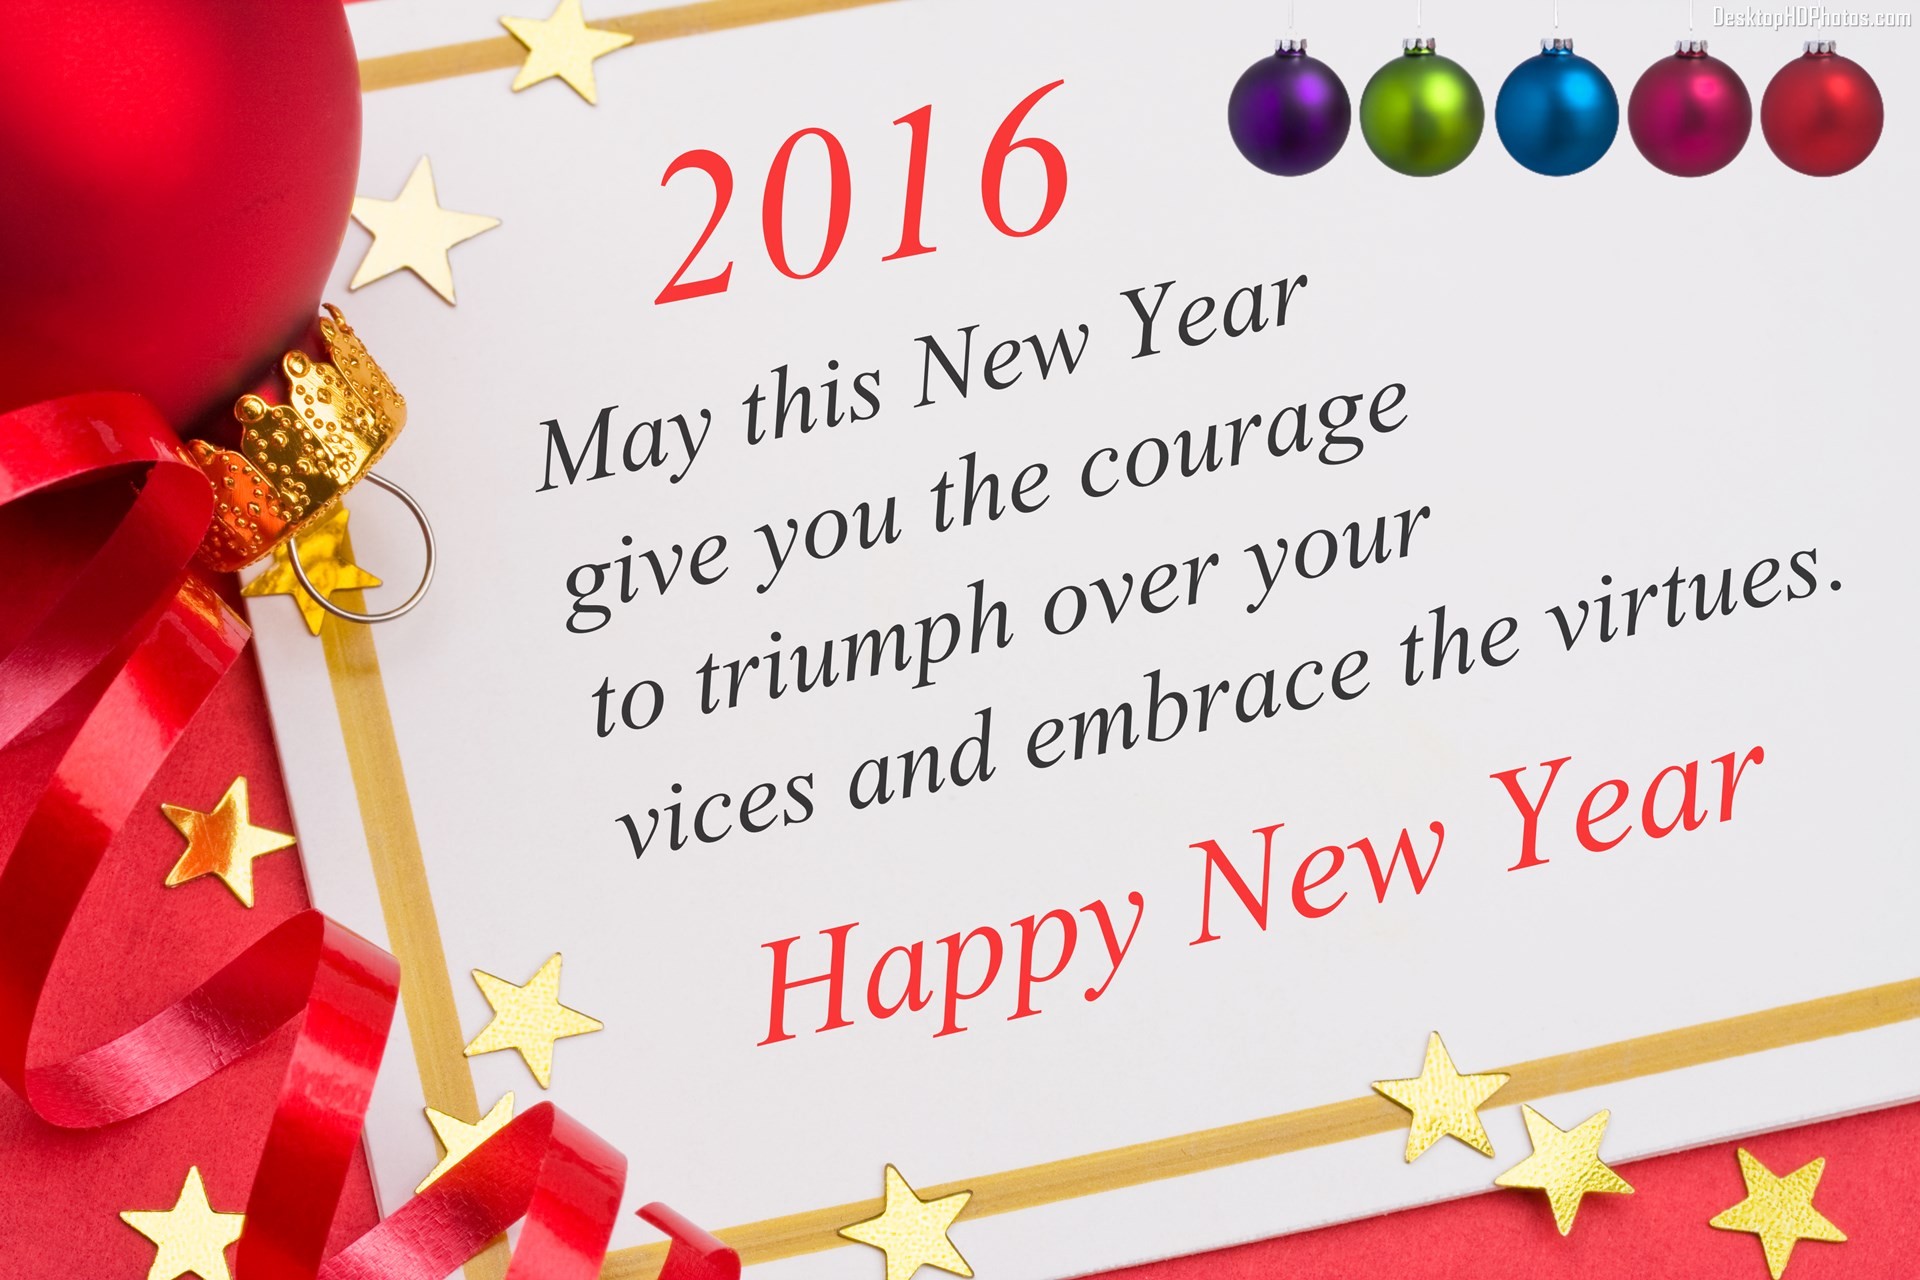 Beautiful Happy New Year Wallpapers Hd - Thought Of Happy New Year - HD Wallpaper 